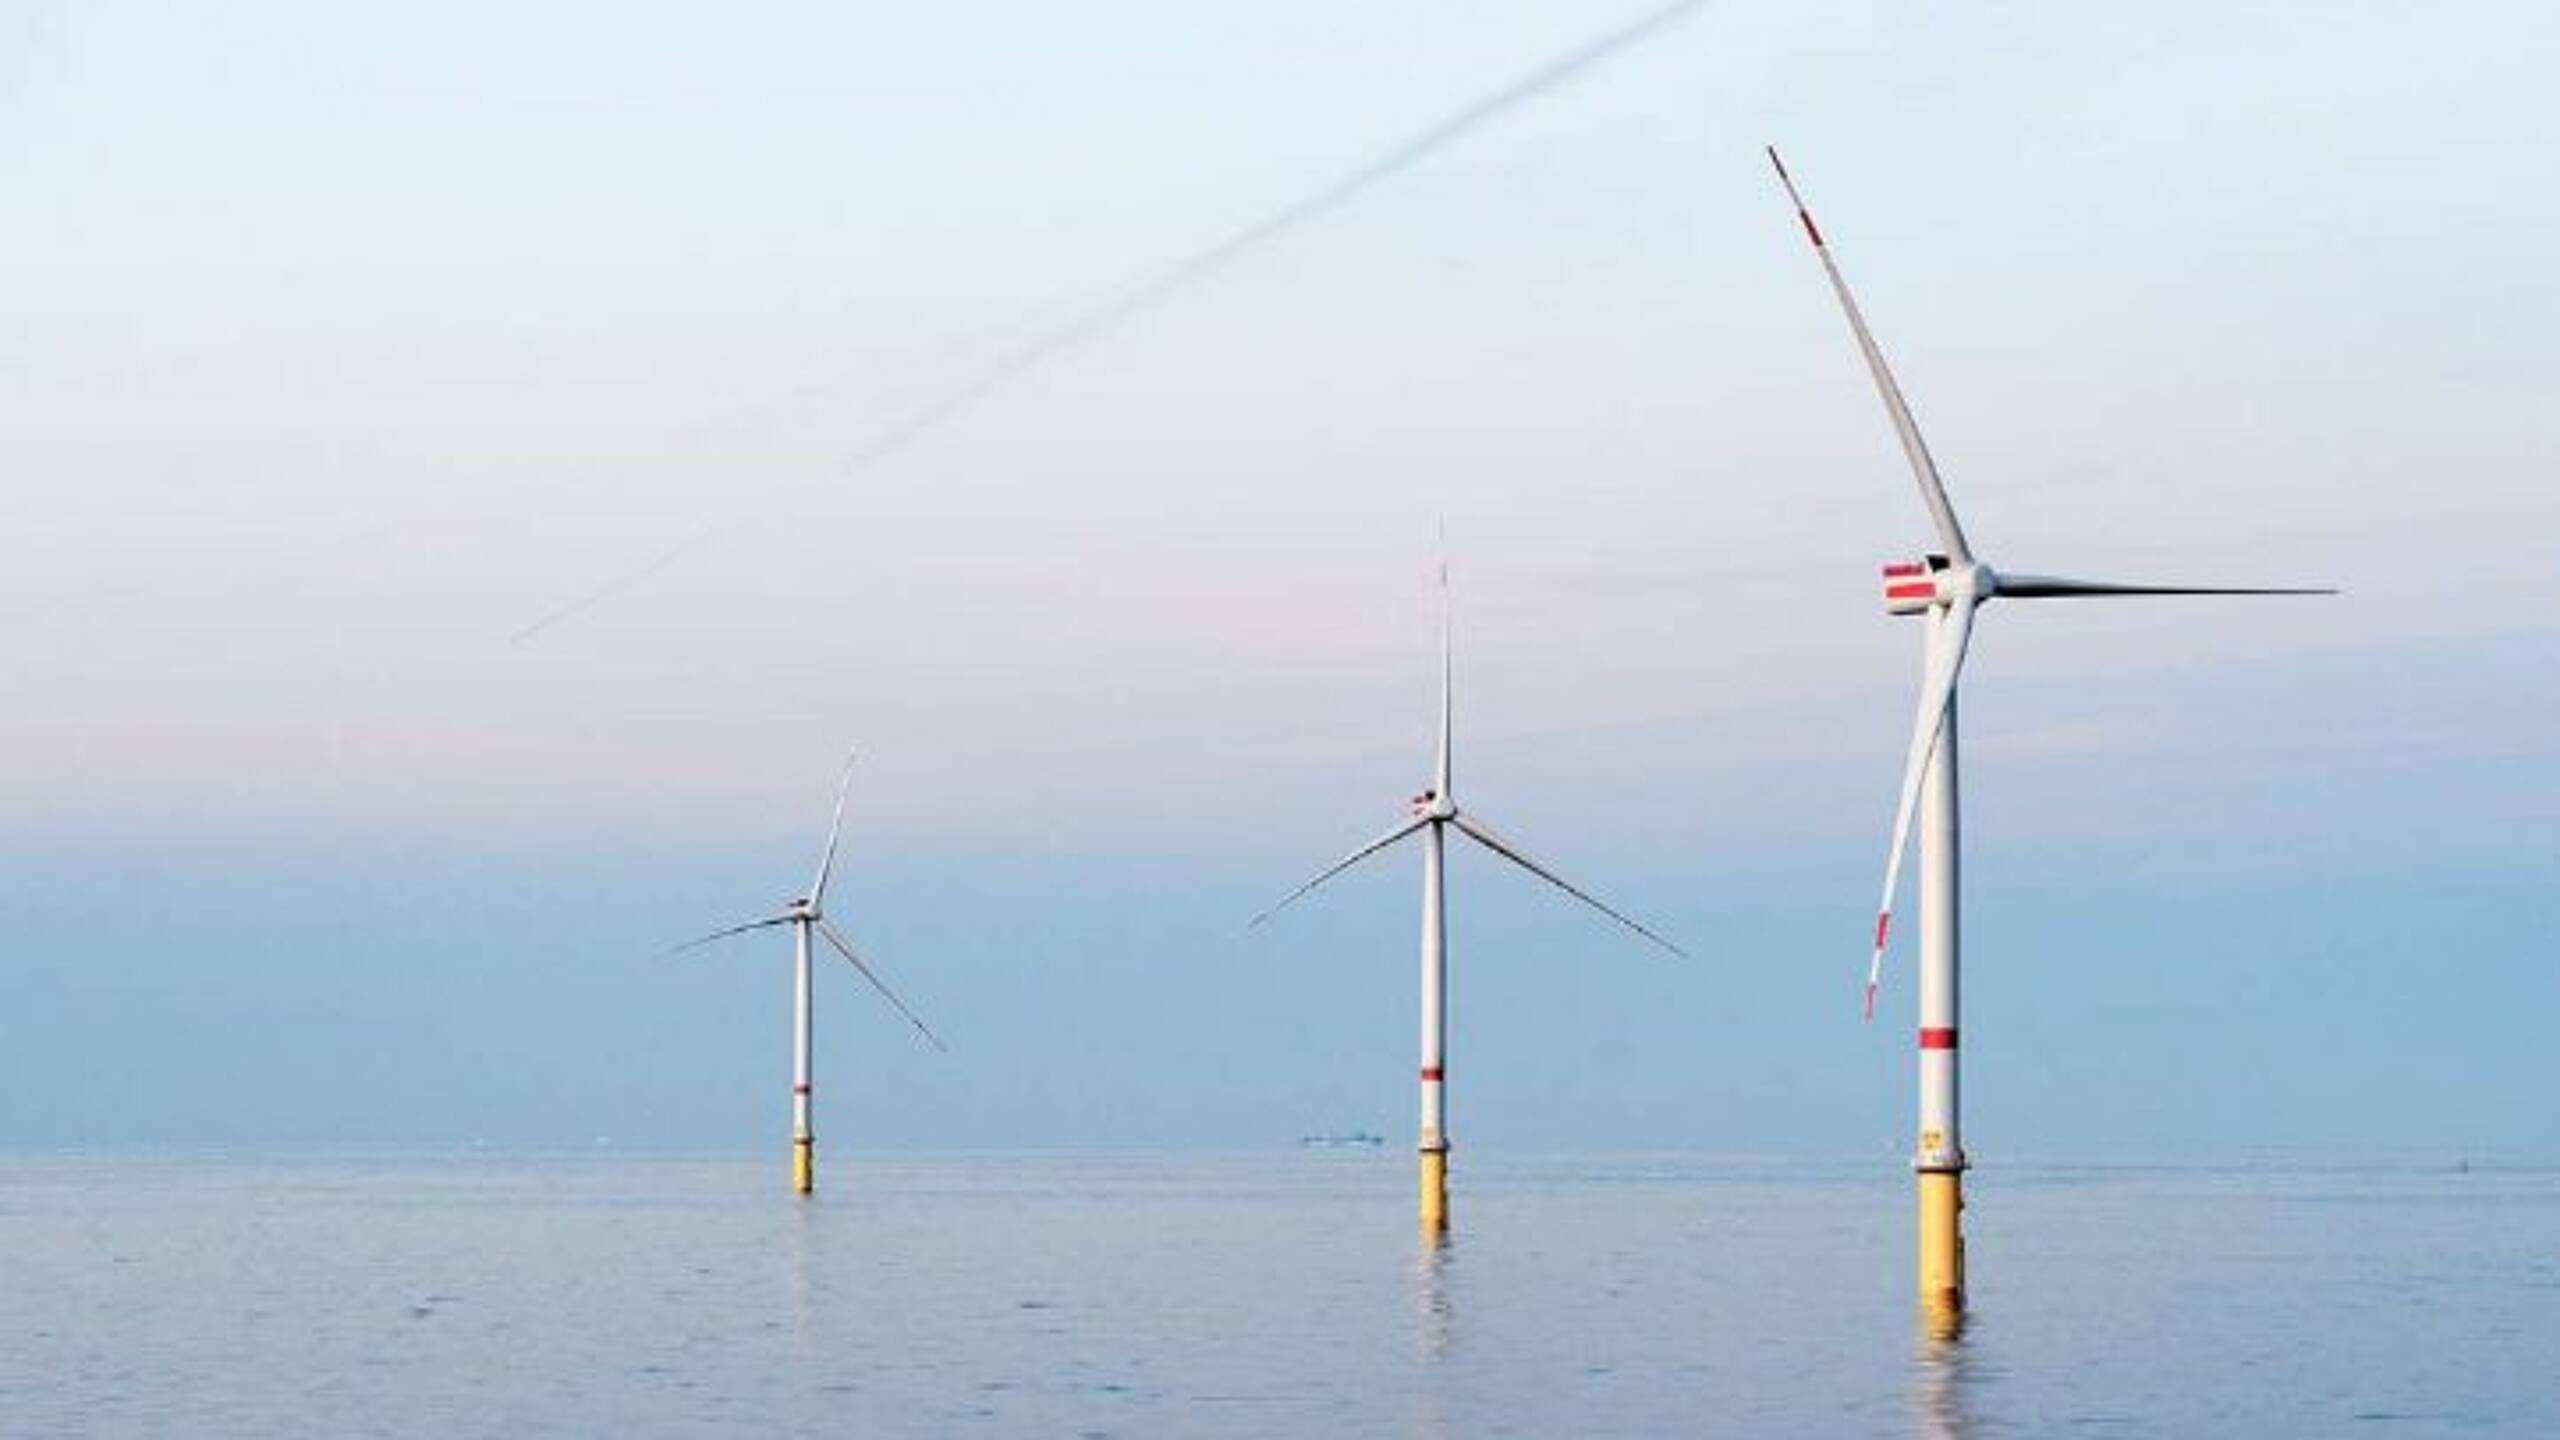 Hornsea Four: UK’s second largest offshore wind farm gets greenlight